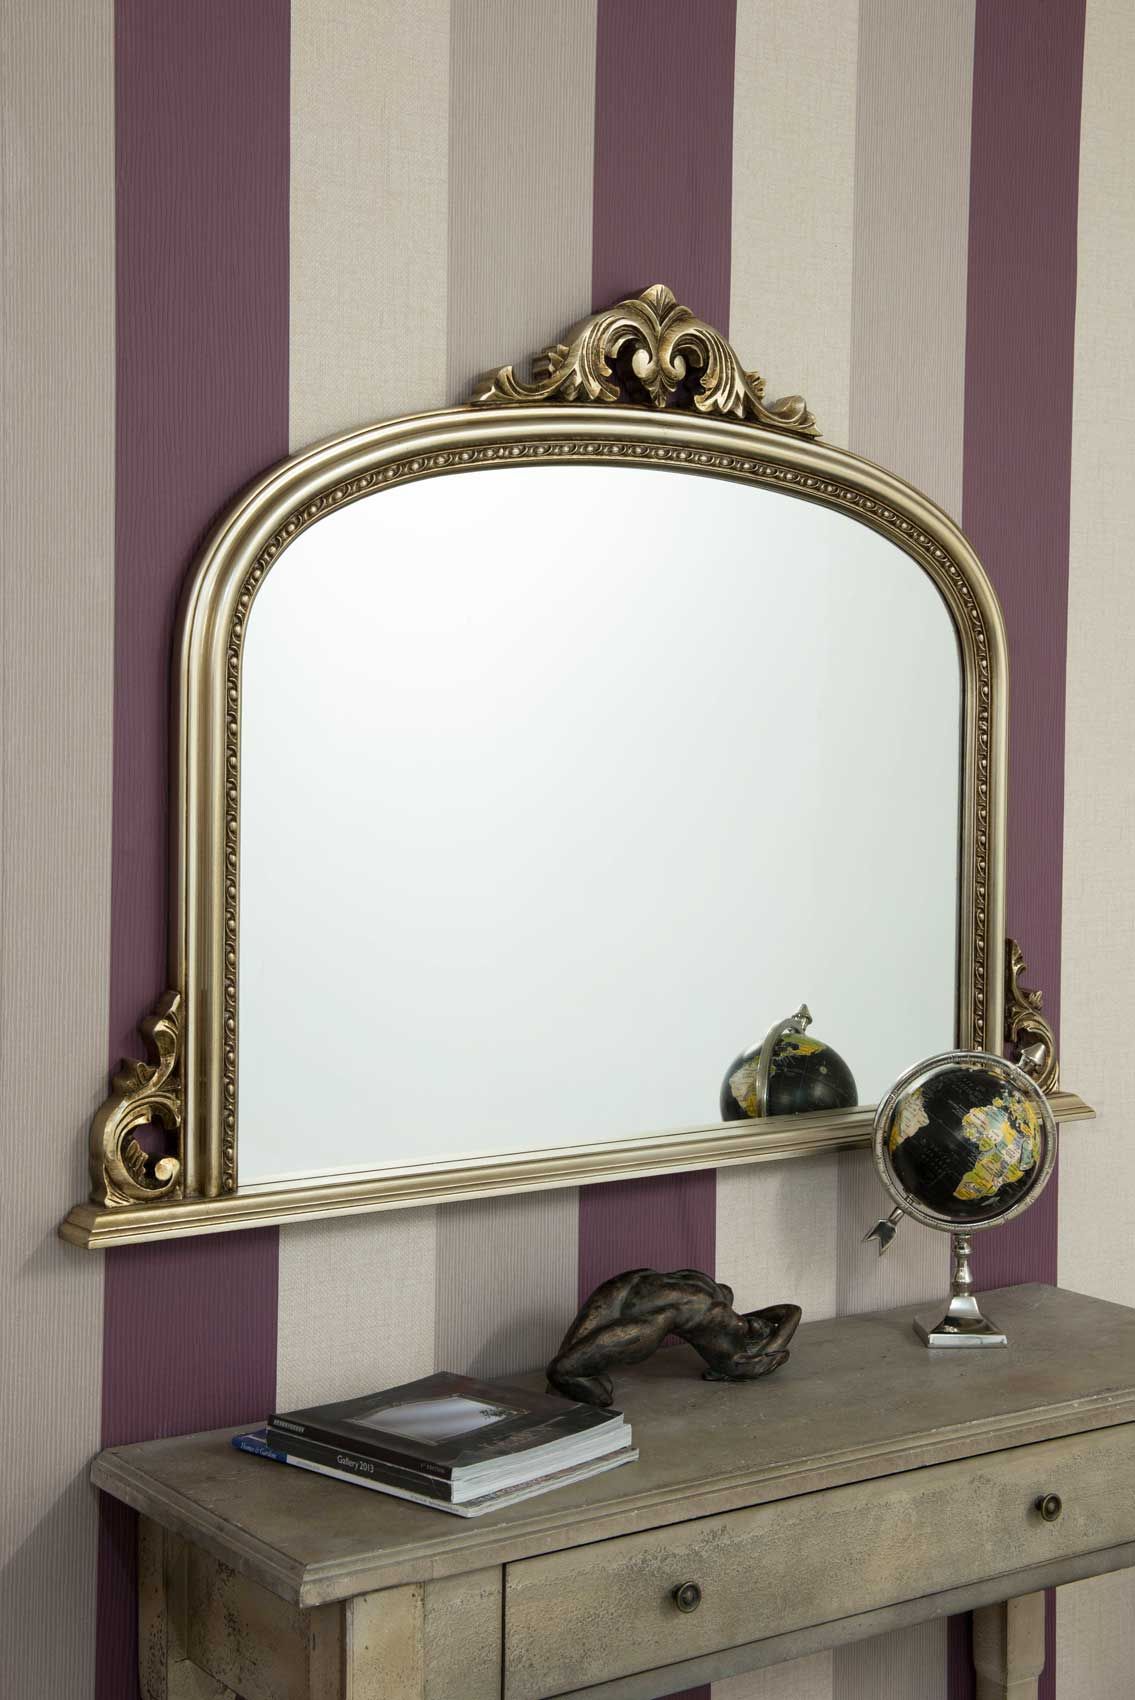 Large Silver Antique Design Over Mantle Big Wall Mirror 4ft2 X 3ft Throughout Antiqued Glass Wall Mirrors (View 10 of 15)